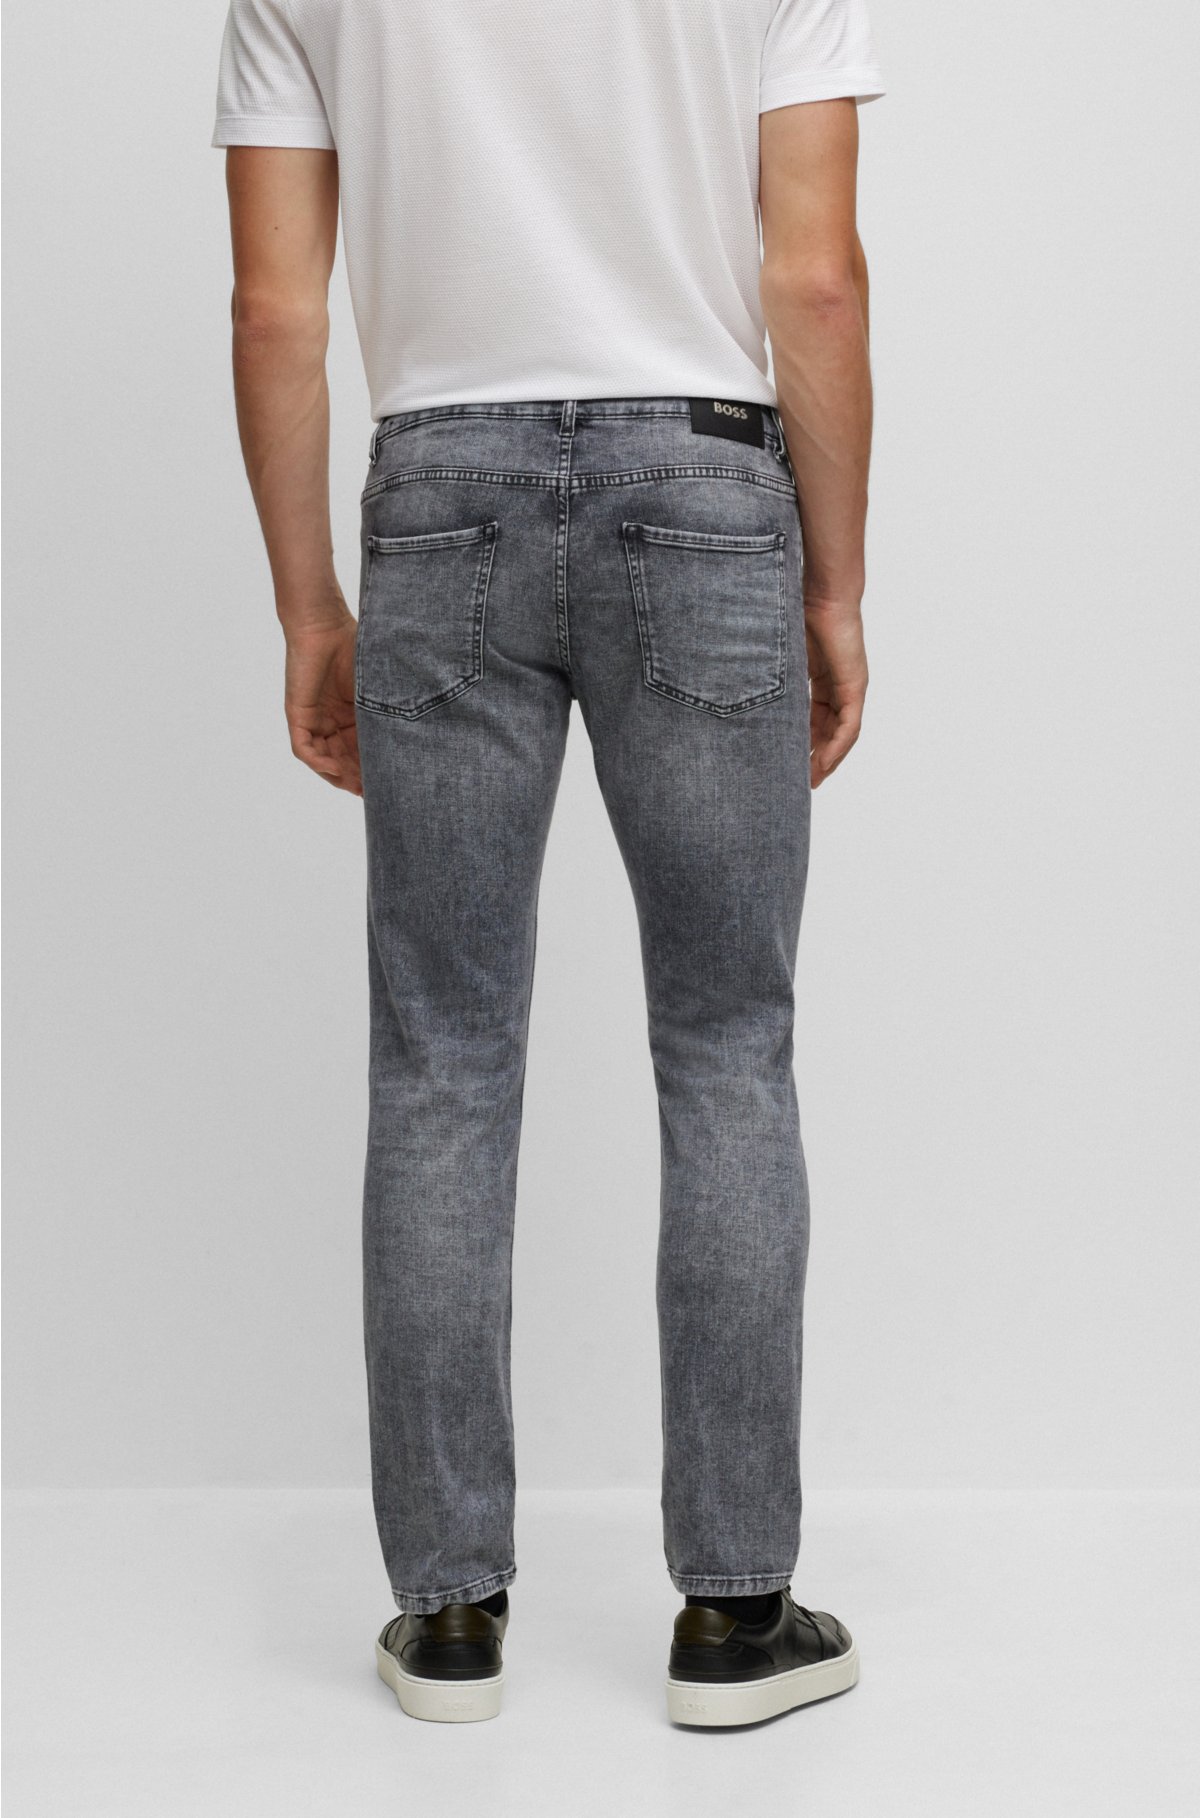 controller Ung dame Mission BOSS - Slim-fit jeans in stonewashed gray Italian stretch denim